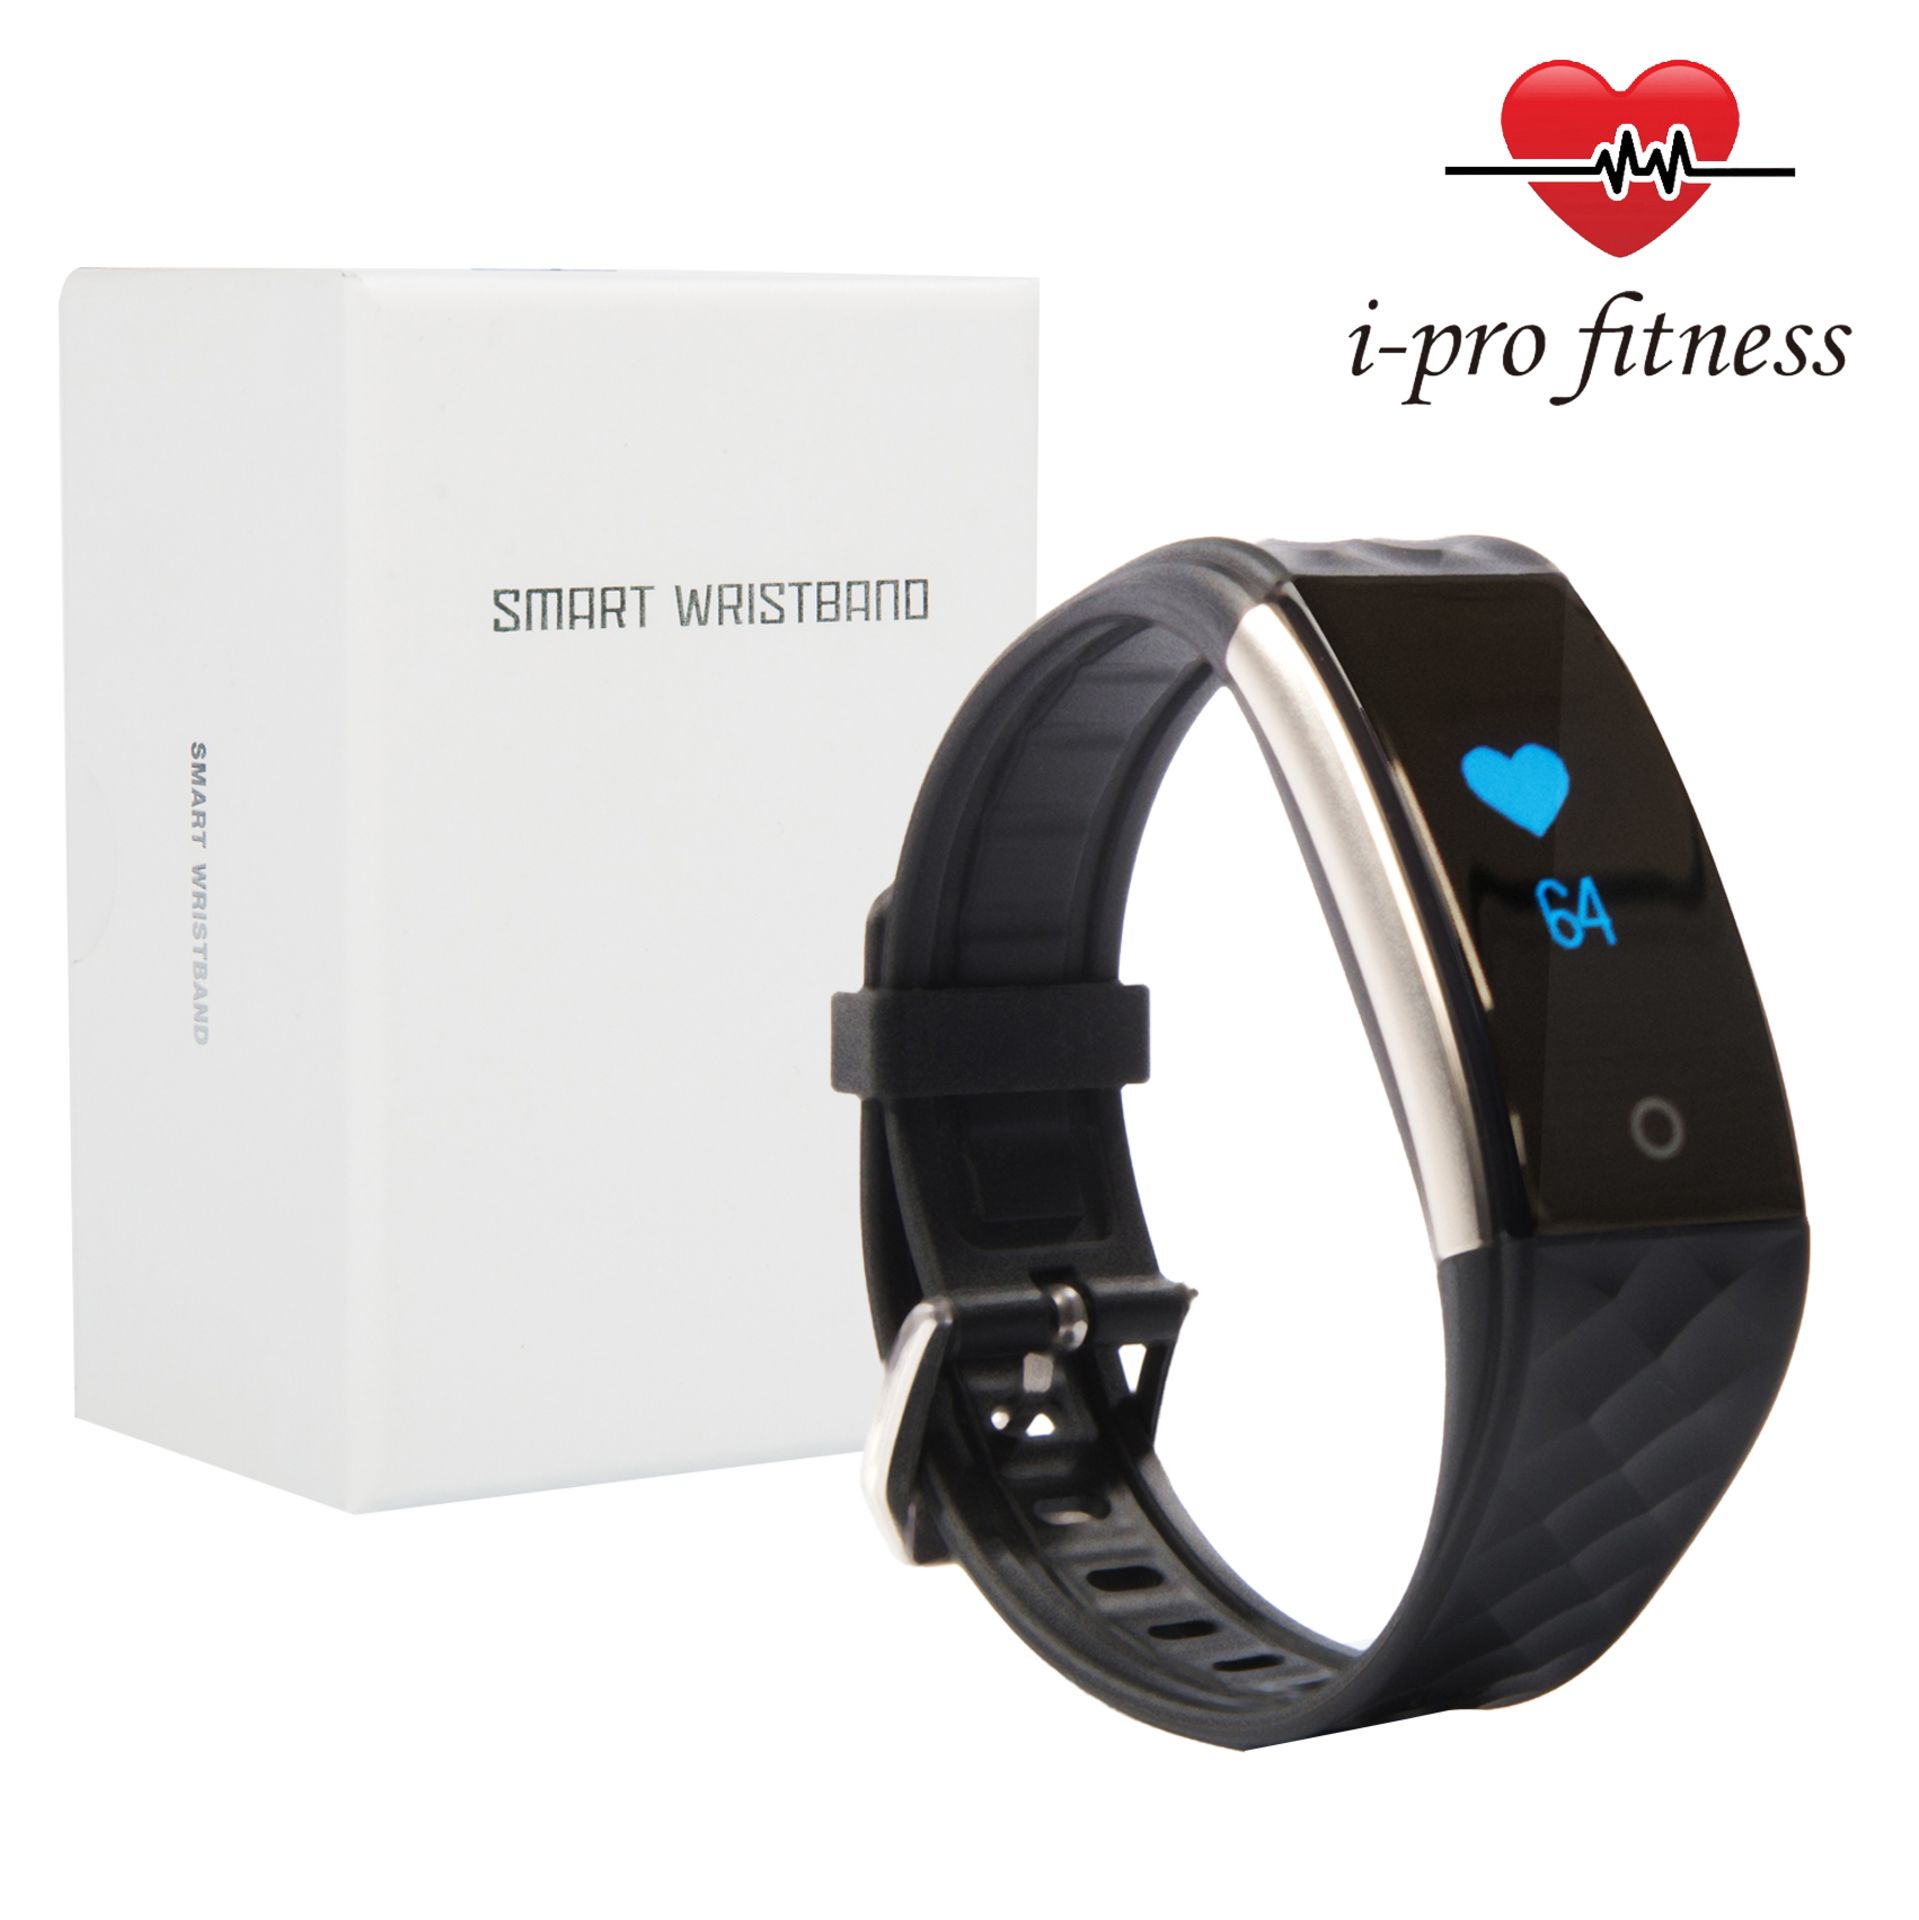 i-Pro S2 Waterproof Fitness Tracker With Heart Rate Monitor, Sleep Tracker App And Calorie Counter - Image 2 of 7